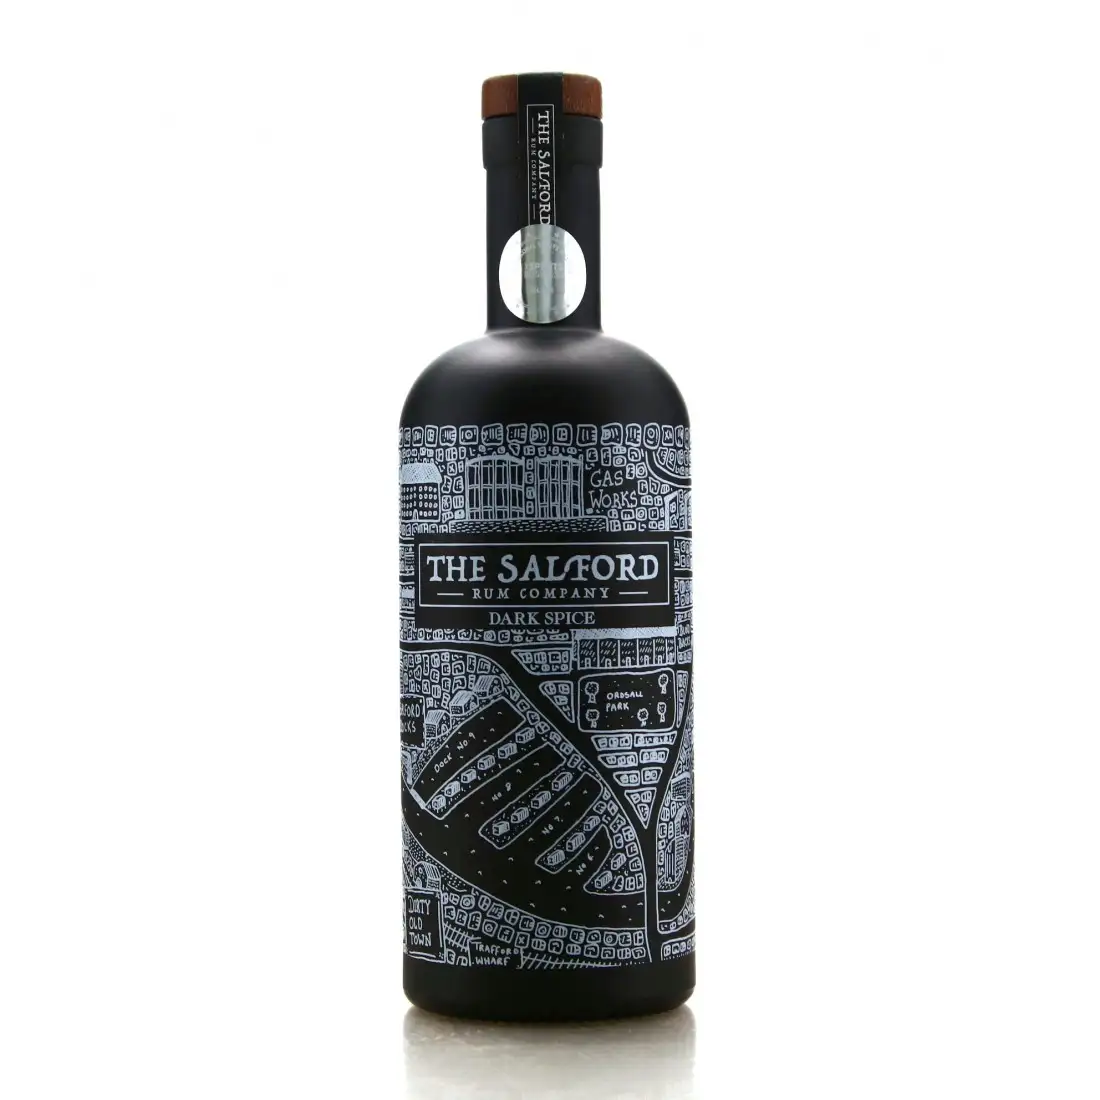 Image of the front of the bottle of the rum Dark Spice